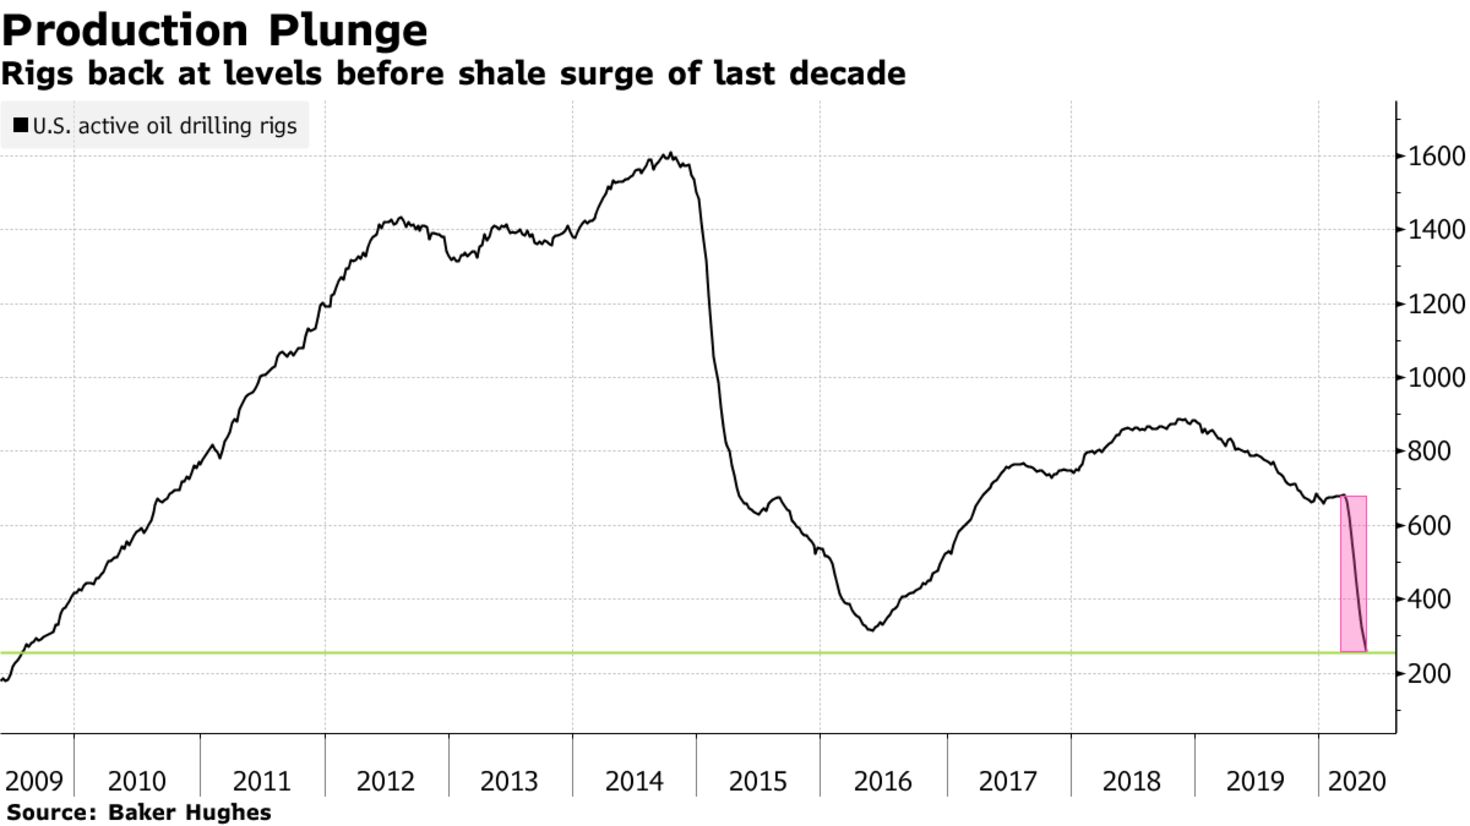 Rigs back at levels before shale surge of last decade